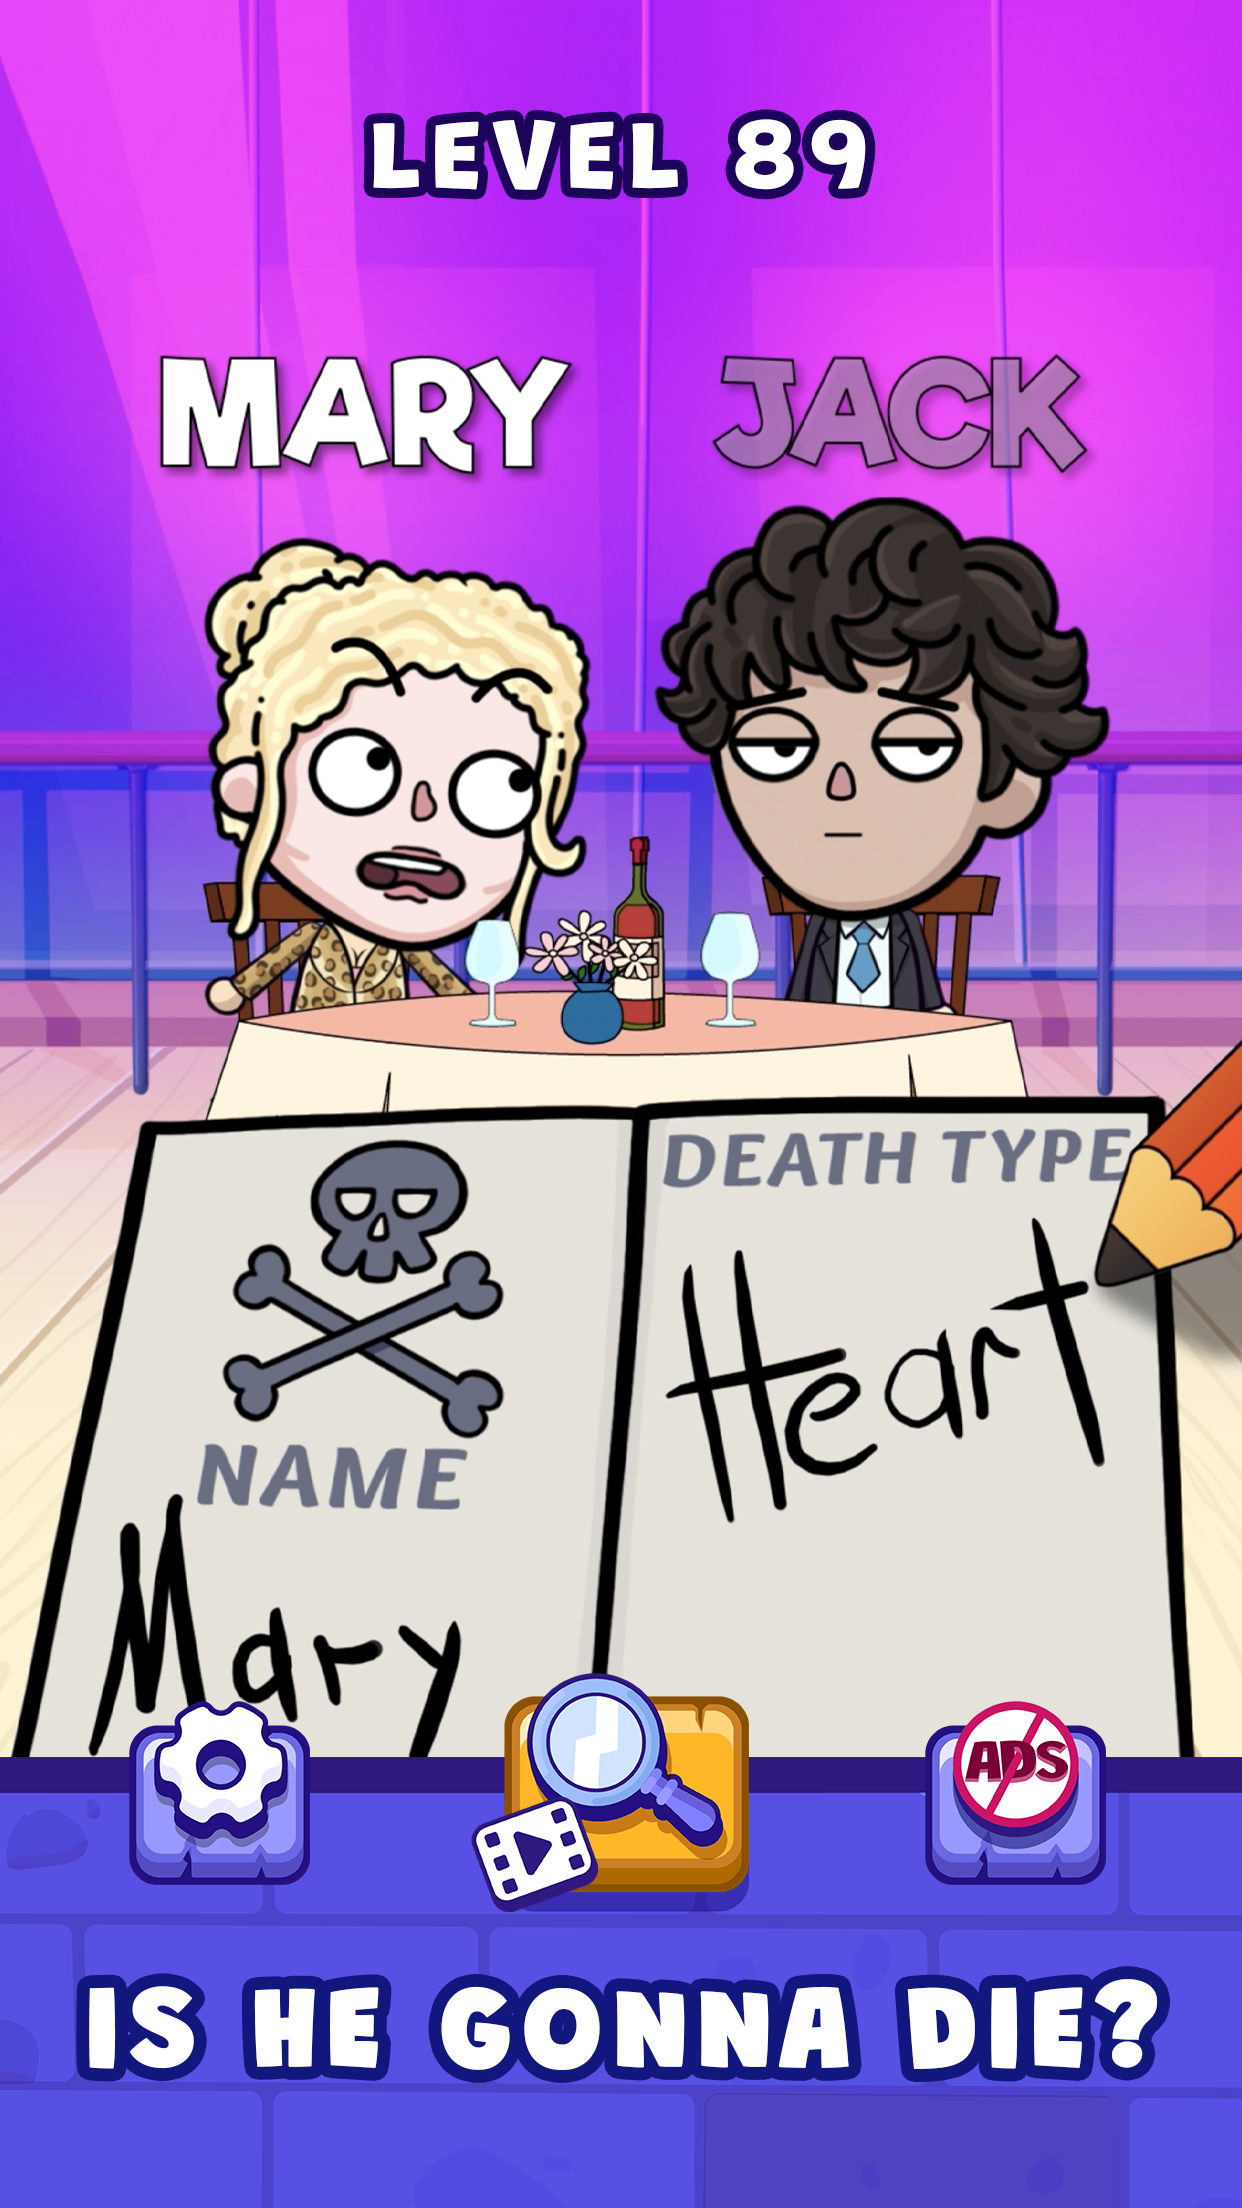 Tricky puzzles - Funny riddles APK for Android Download